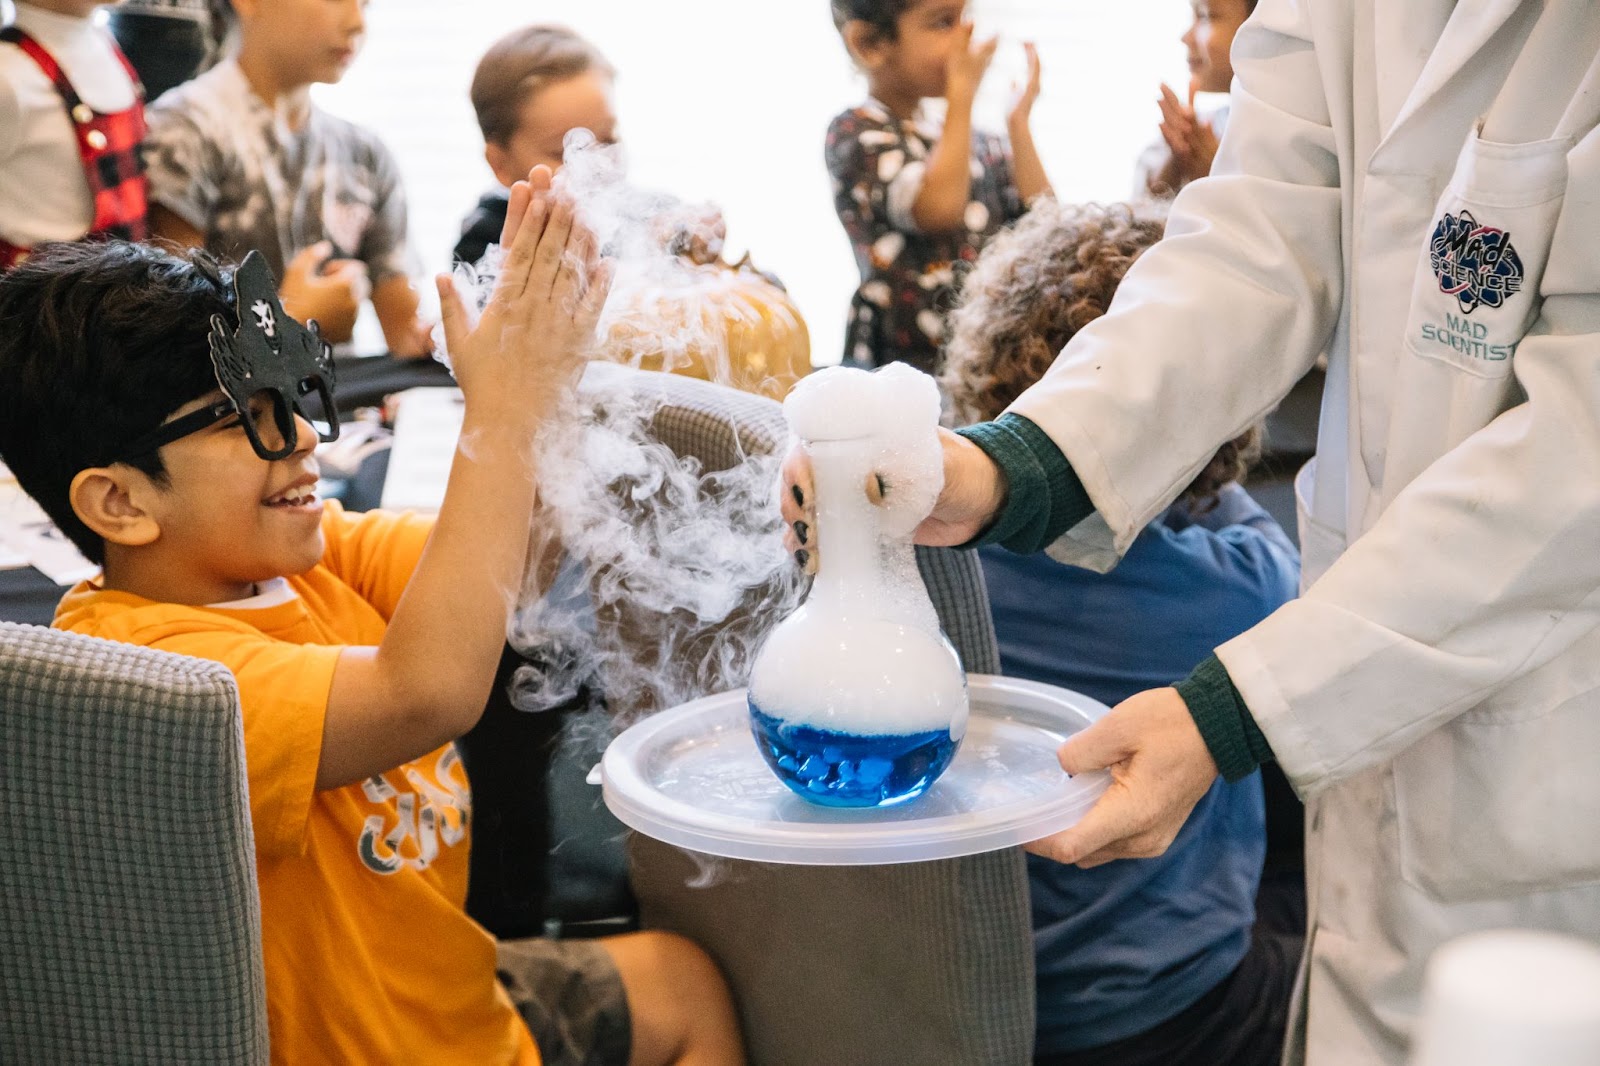 [Alt Text: A picture provided by The Everest Foundation of one of the children interacting with the Mad Scientists experiment at the Halloween event with Loving Hands Children’s Home.]